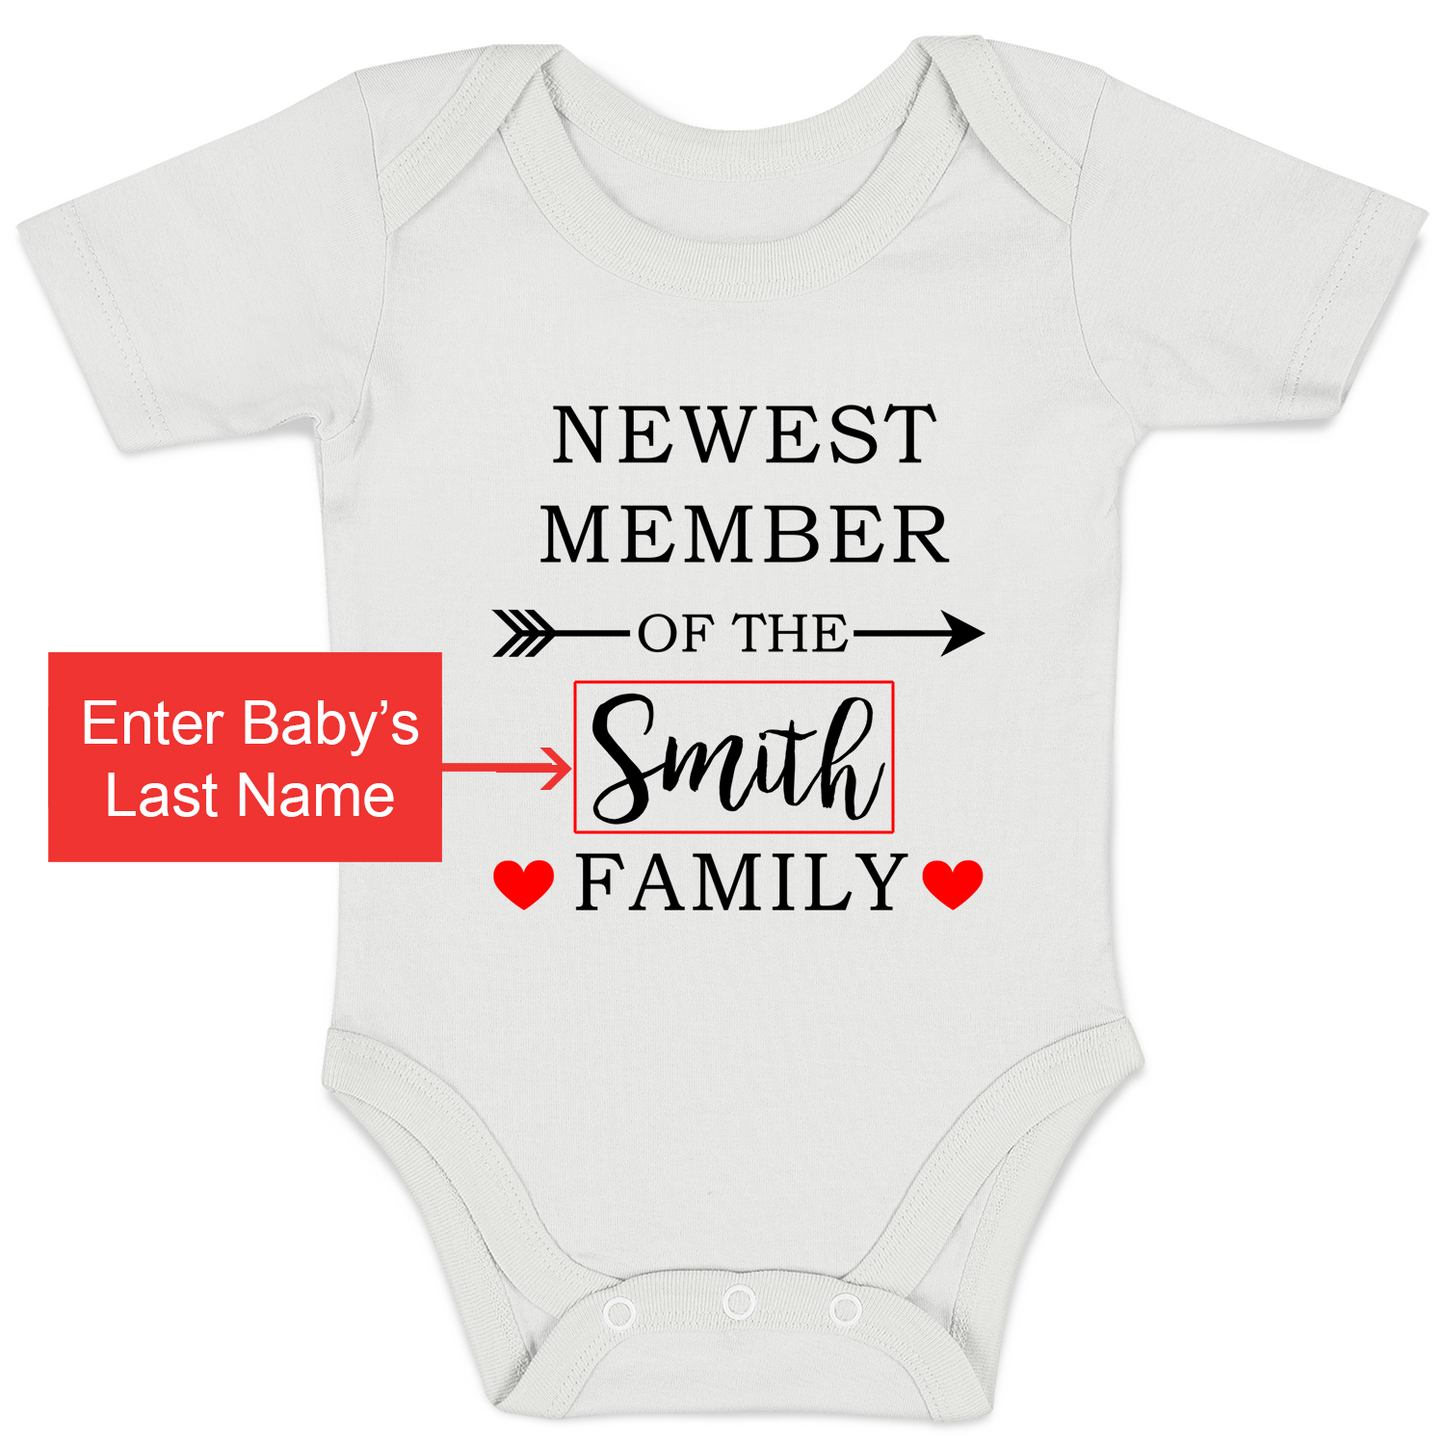 [Personalized] Endanzoo Pregnancy Baby Reveal Organic Baby Bodysuit - Newest Family Member (Short Sleeves)